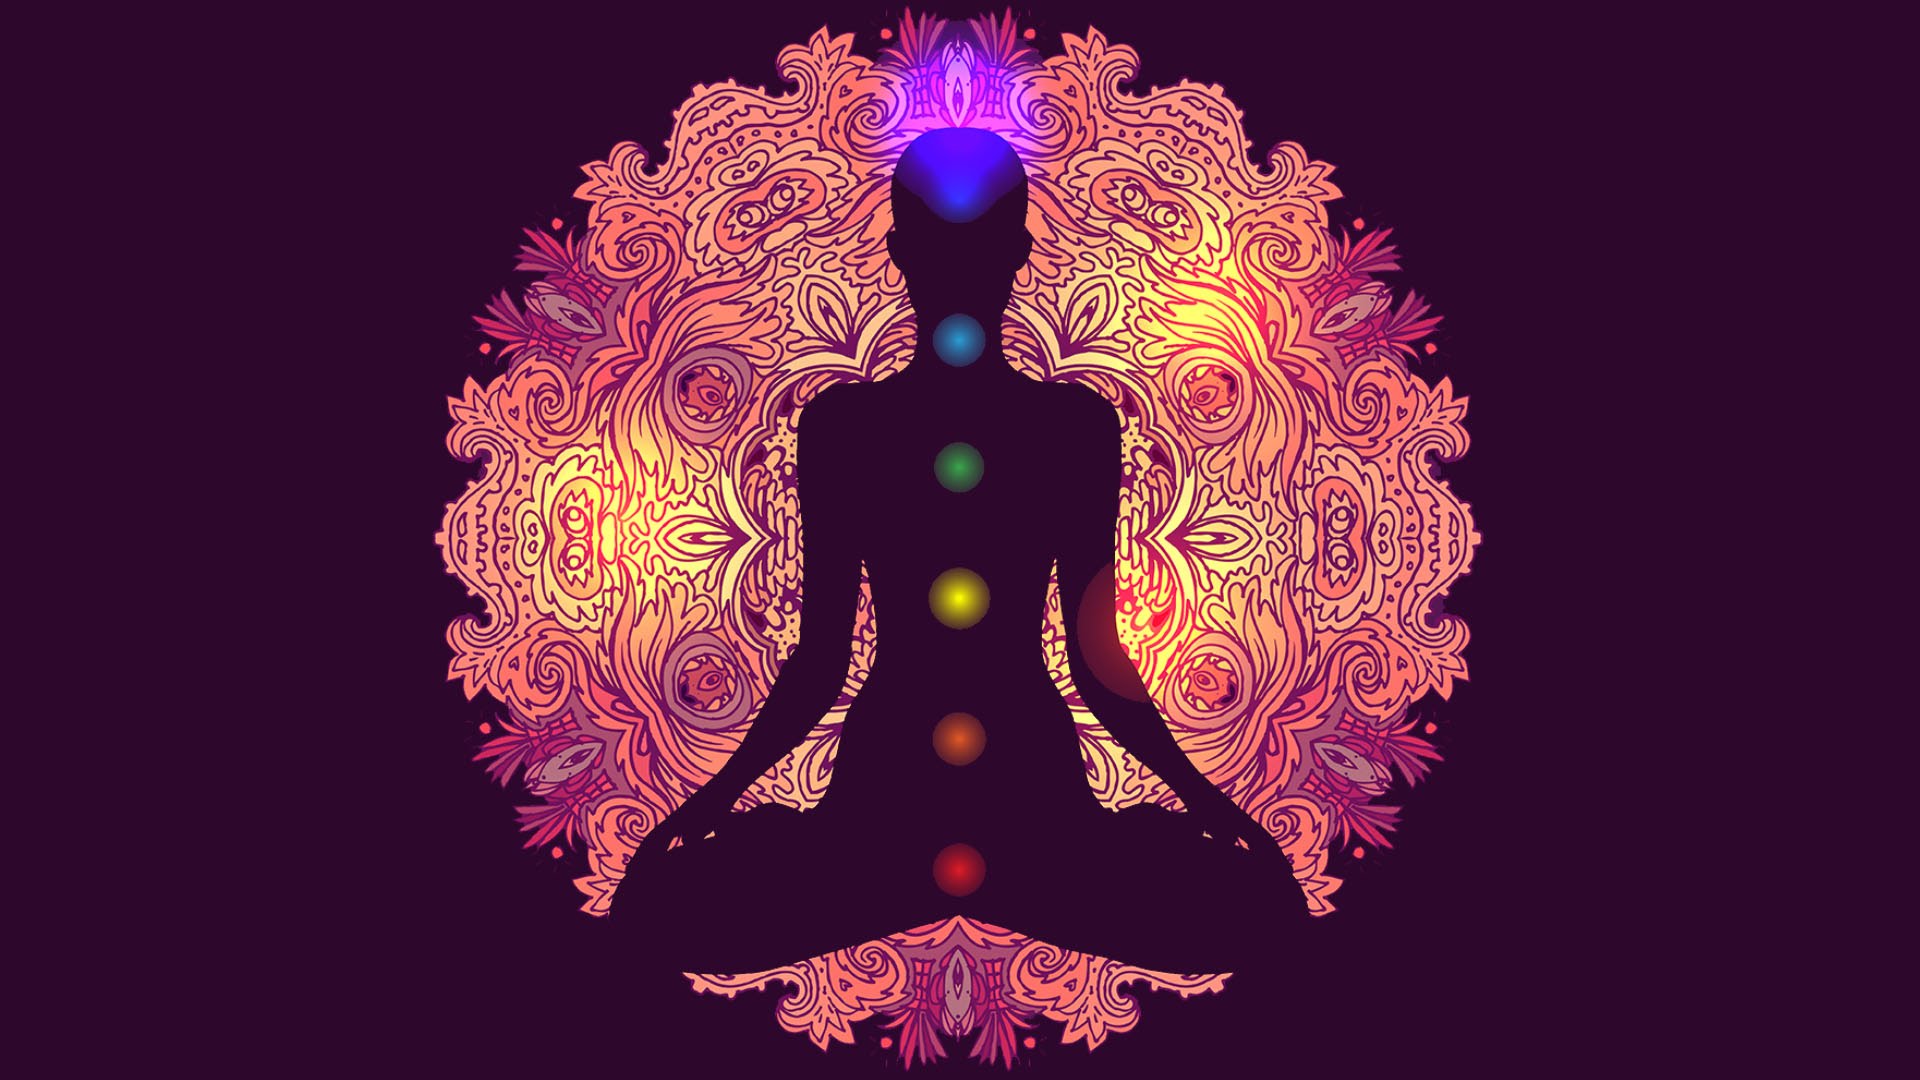 What are the uses of chakras in Buddhism? 13